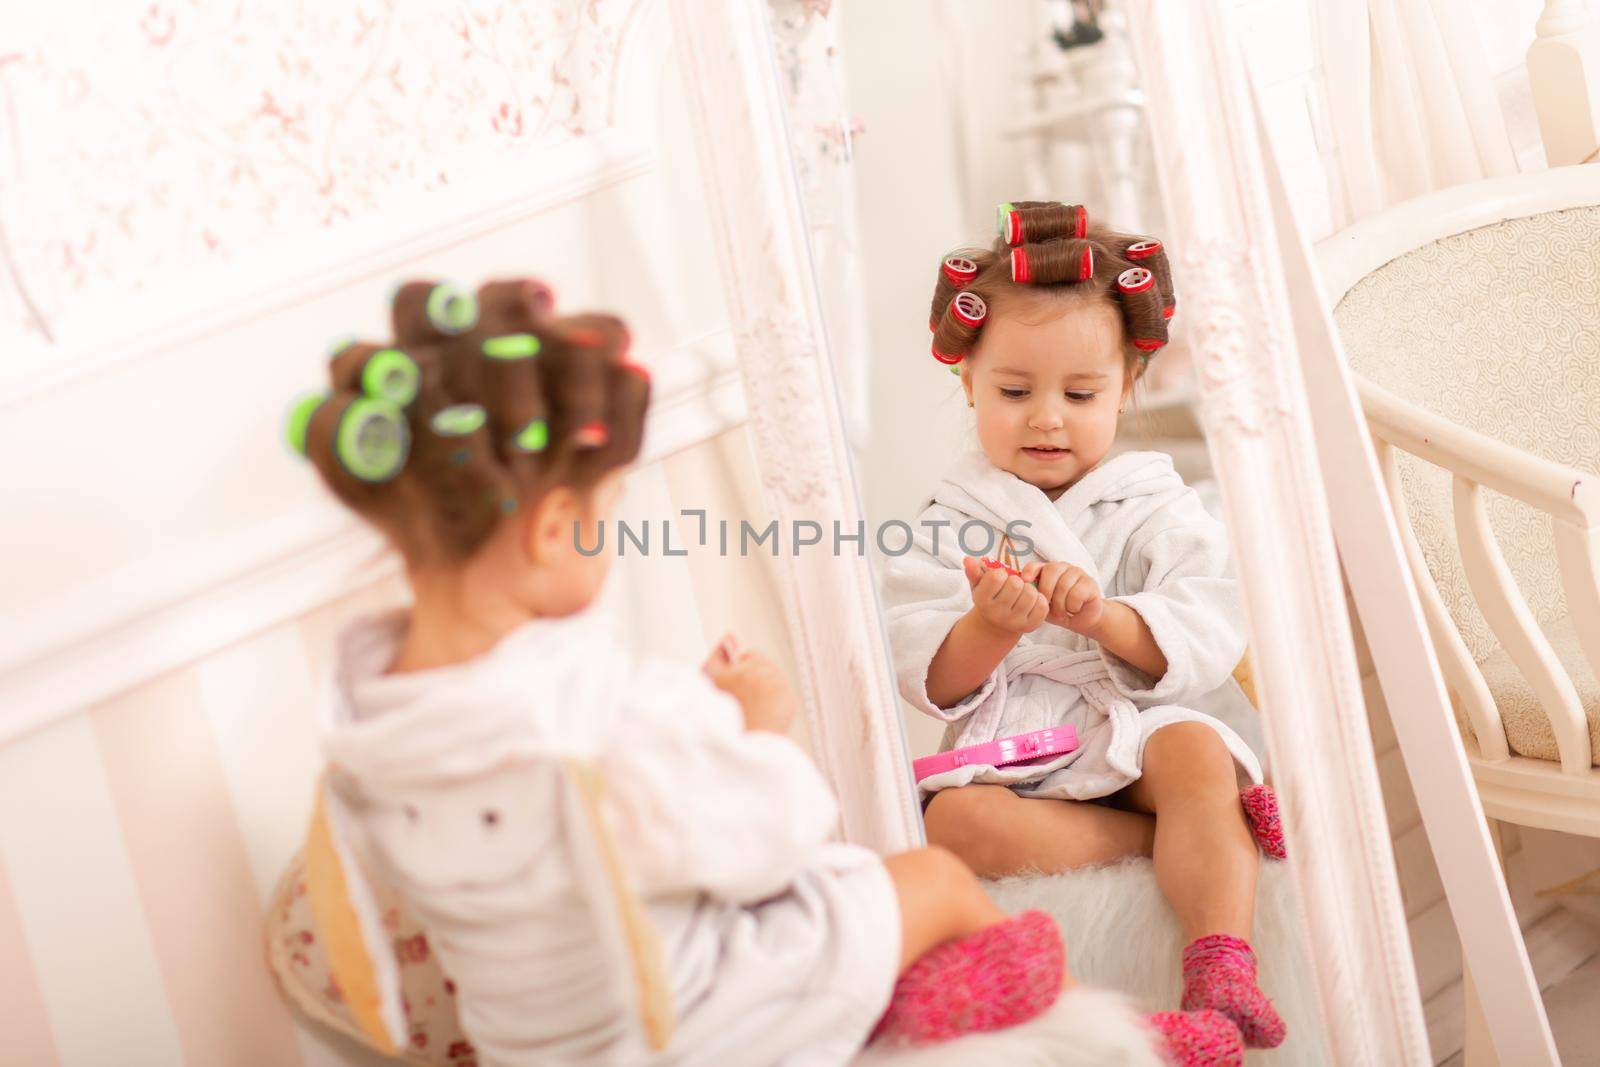 Adorable little girl with curlers paints her fingernails. Copies mom's behavior. Young fashionista. Beauty day.